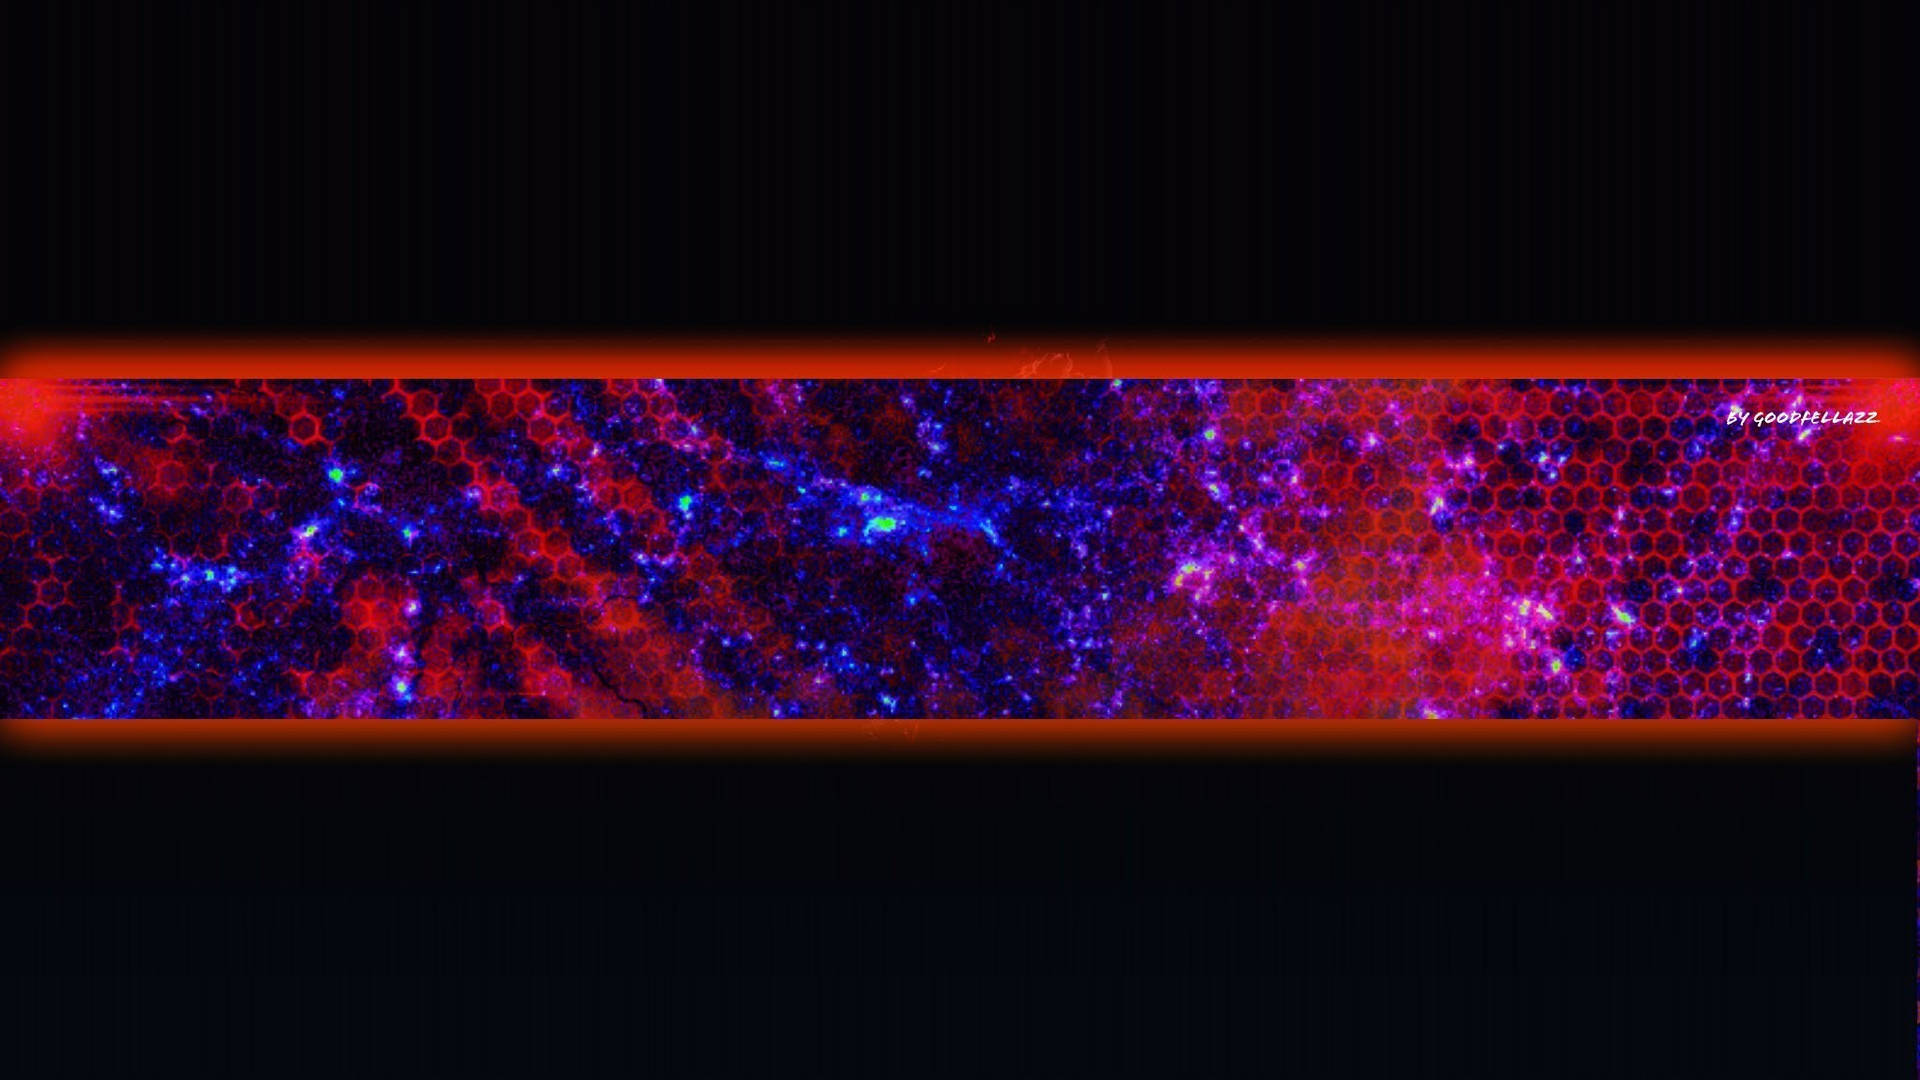 A Dazzling Red and Blue YouTube Banner Wallpaper